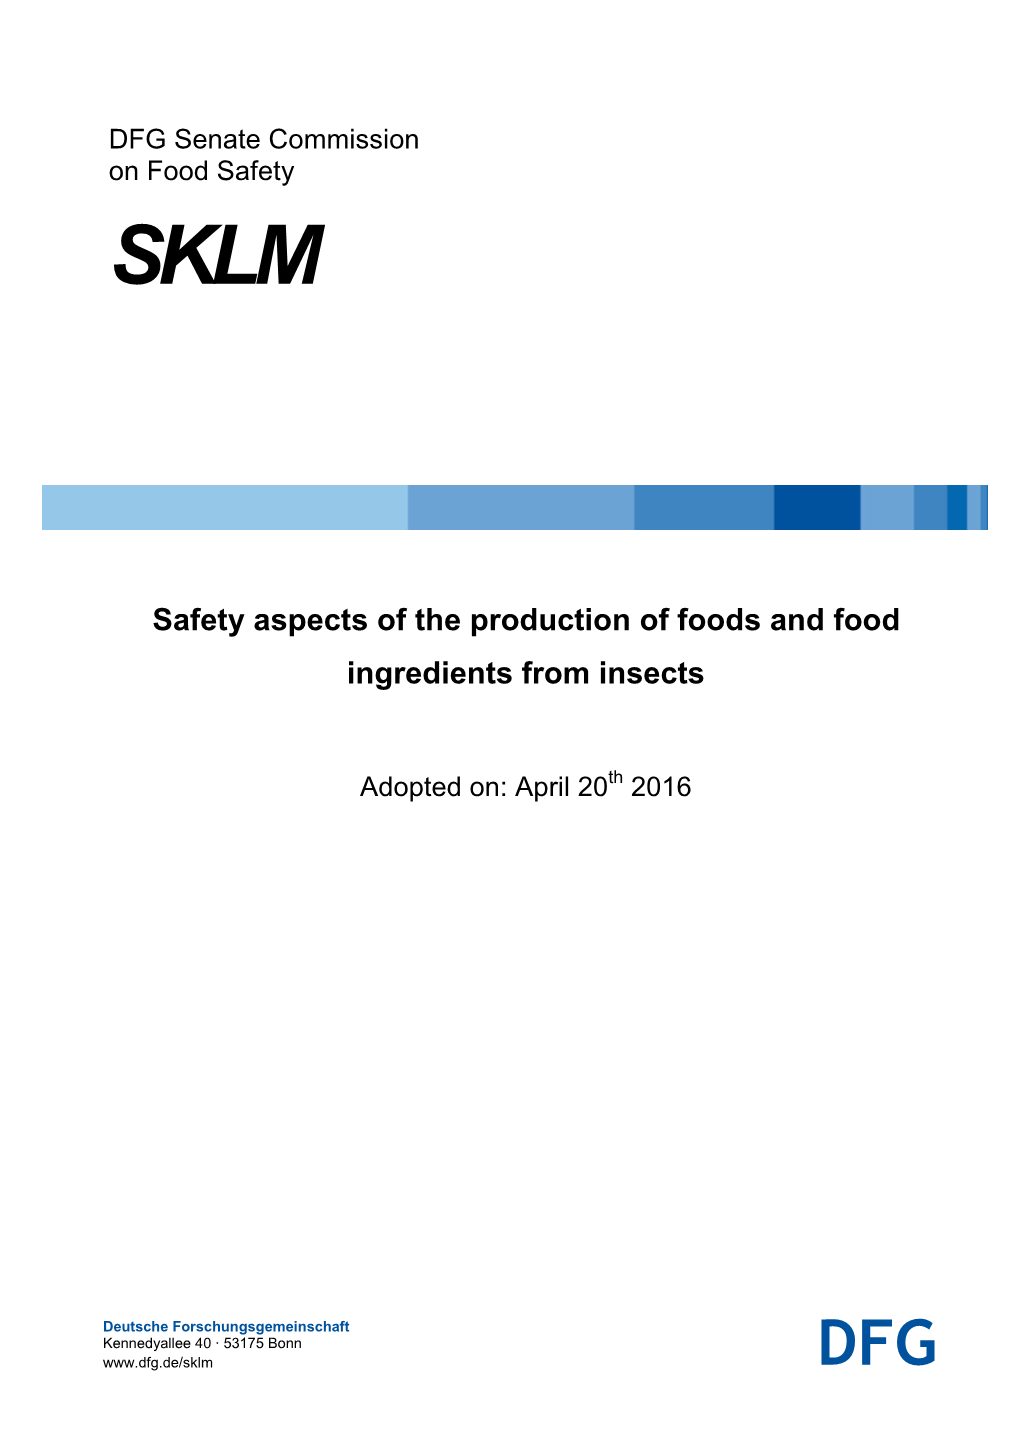 Safety Aspects of the Production of Foods and Food Ingredients from Insects